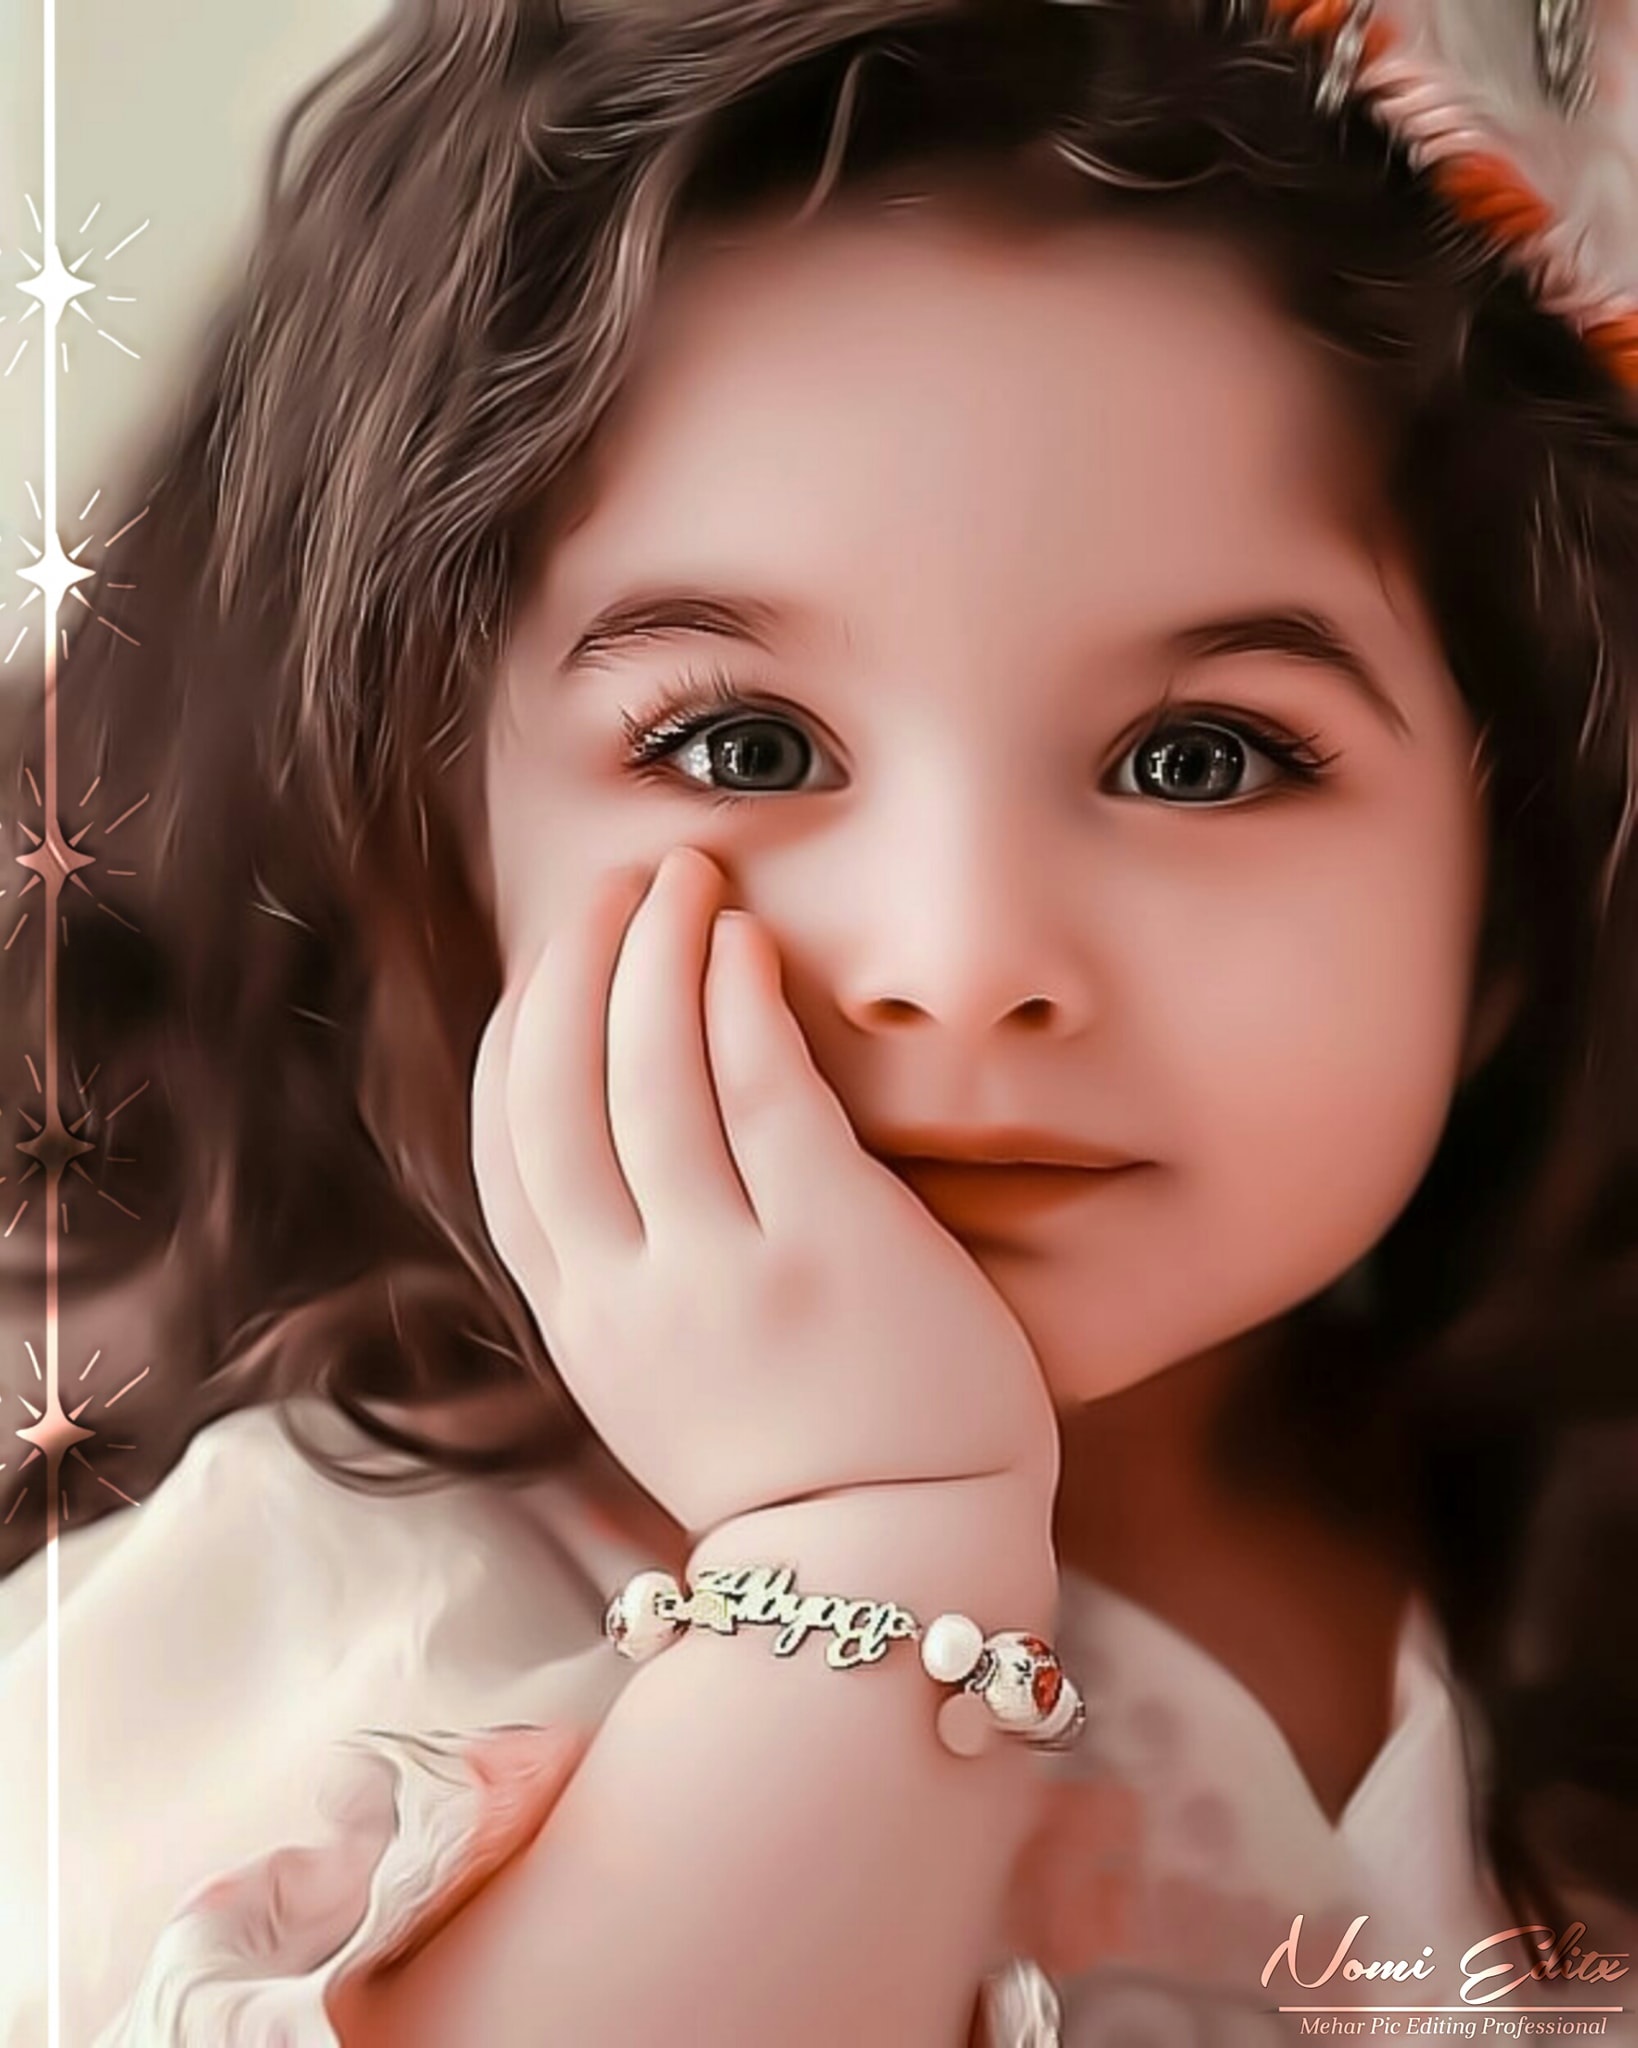 Cute Baby GirlWallpapers